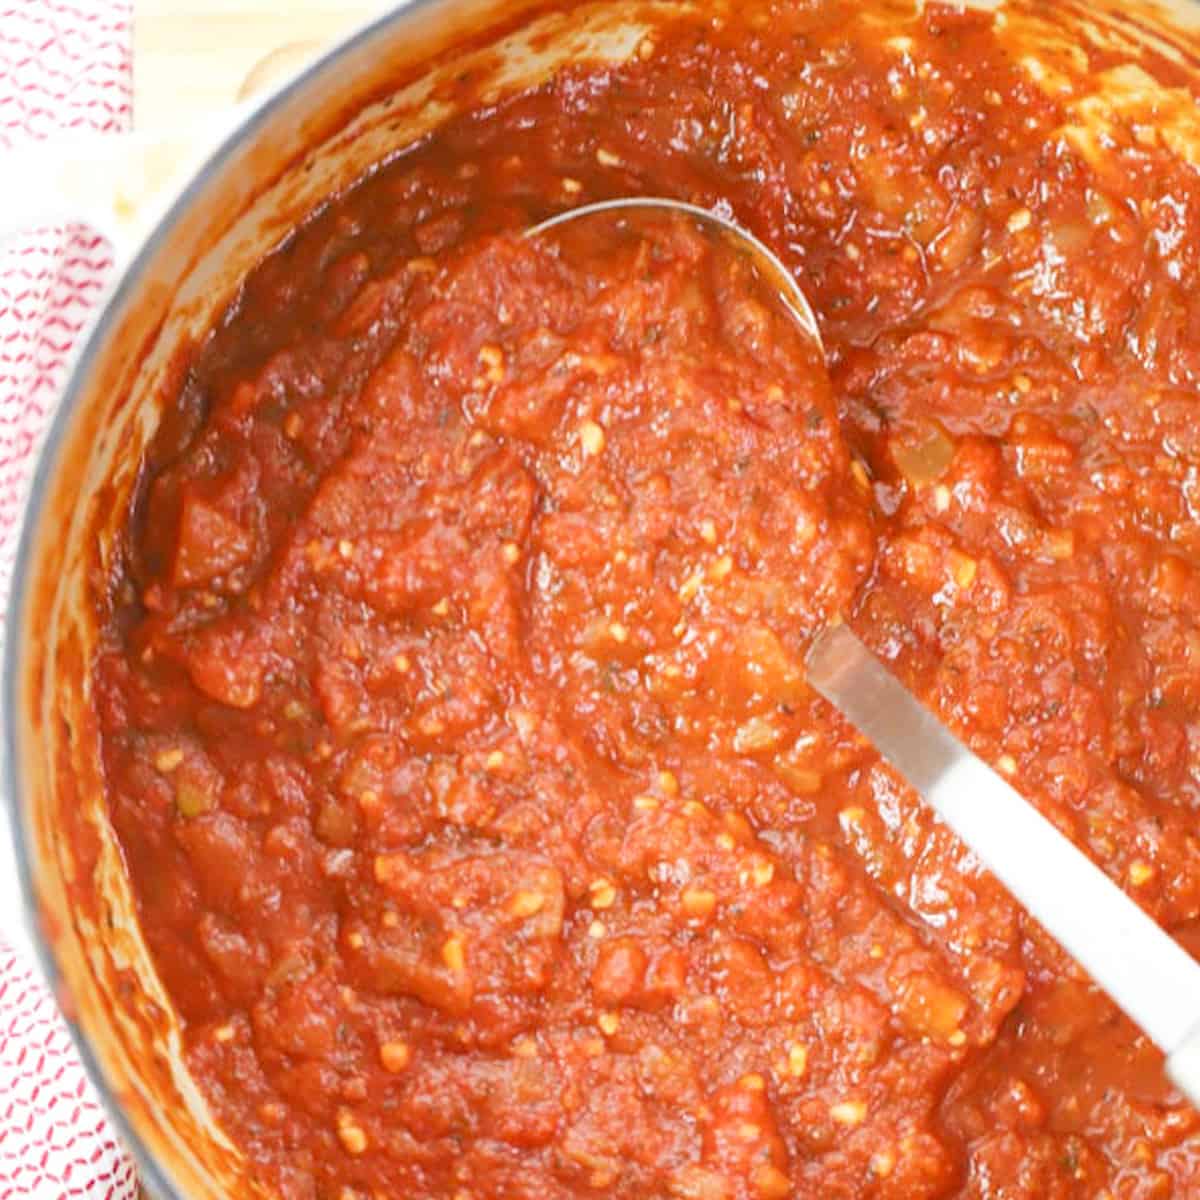 Homemade Marinara made from scratch with simple ingredients